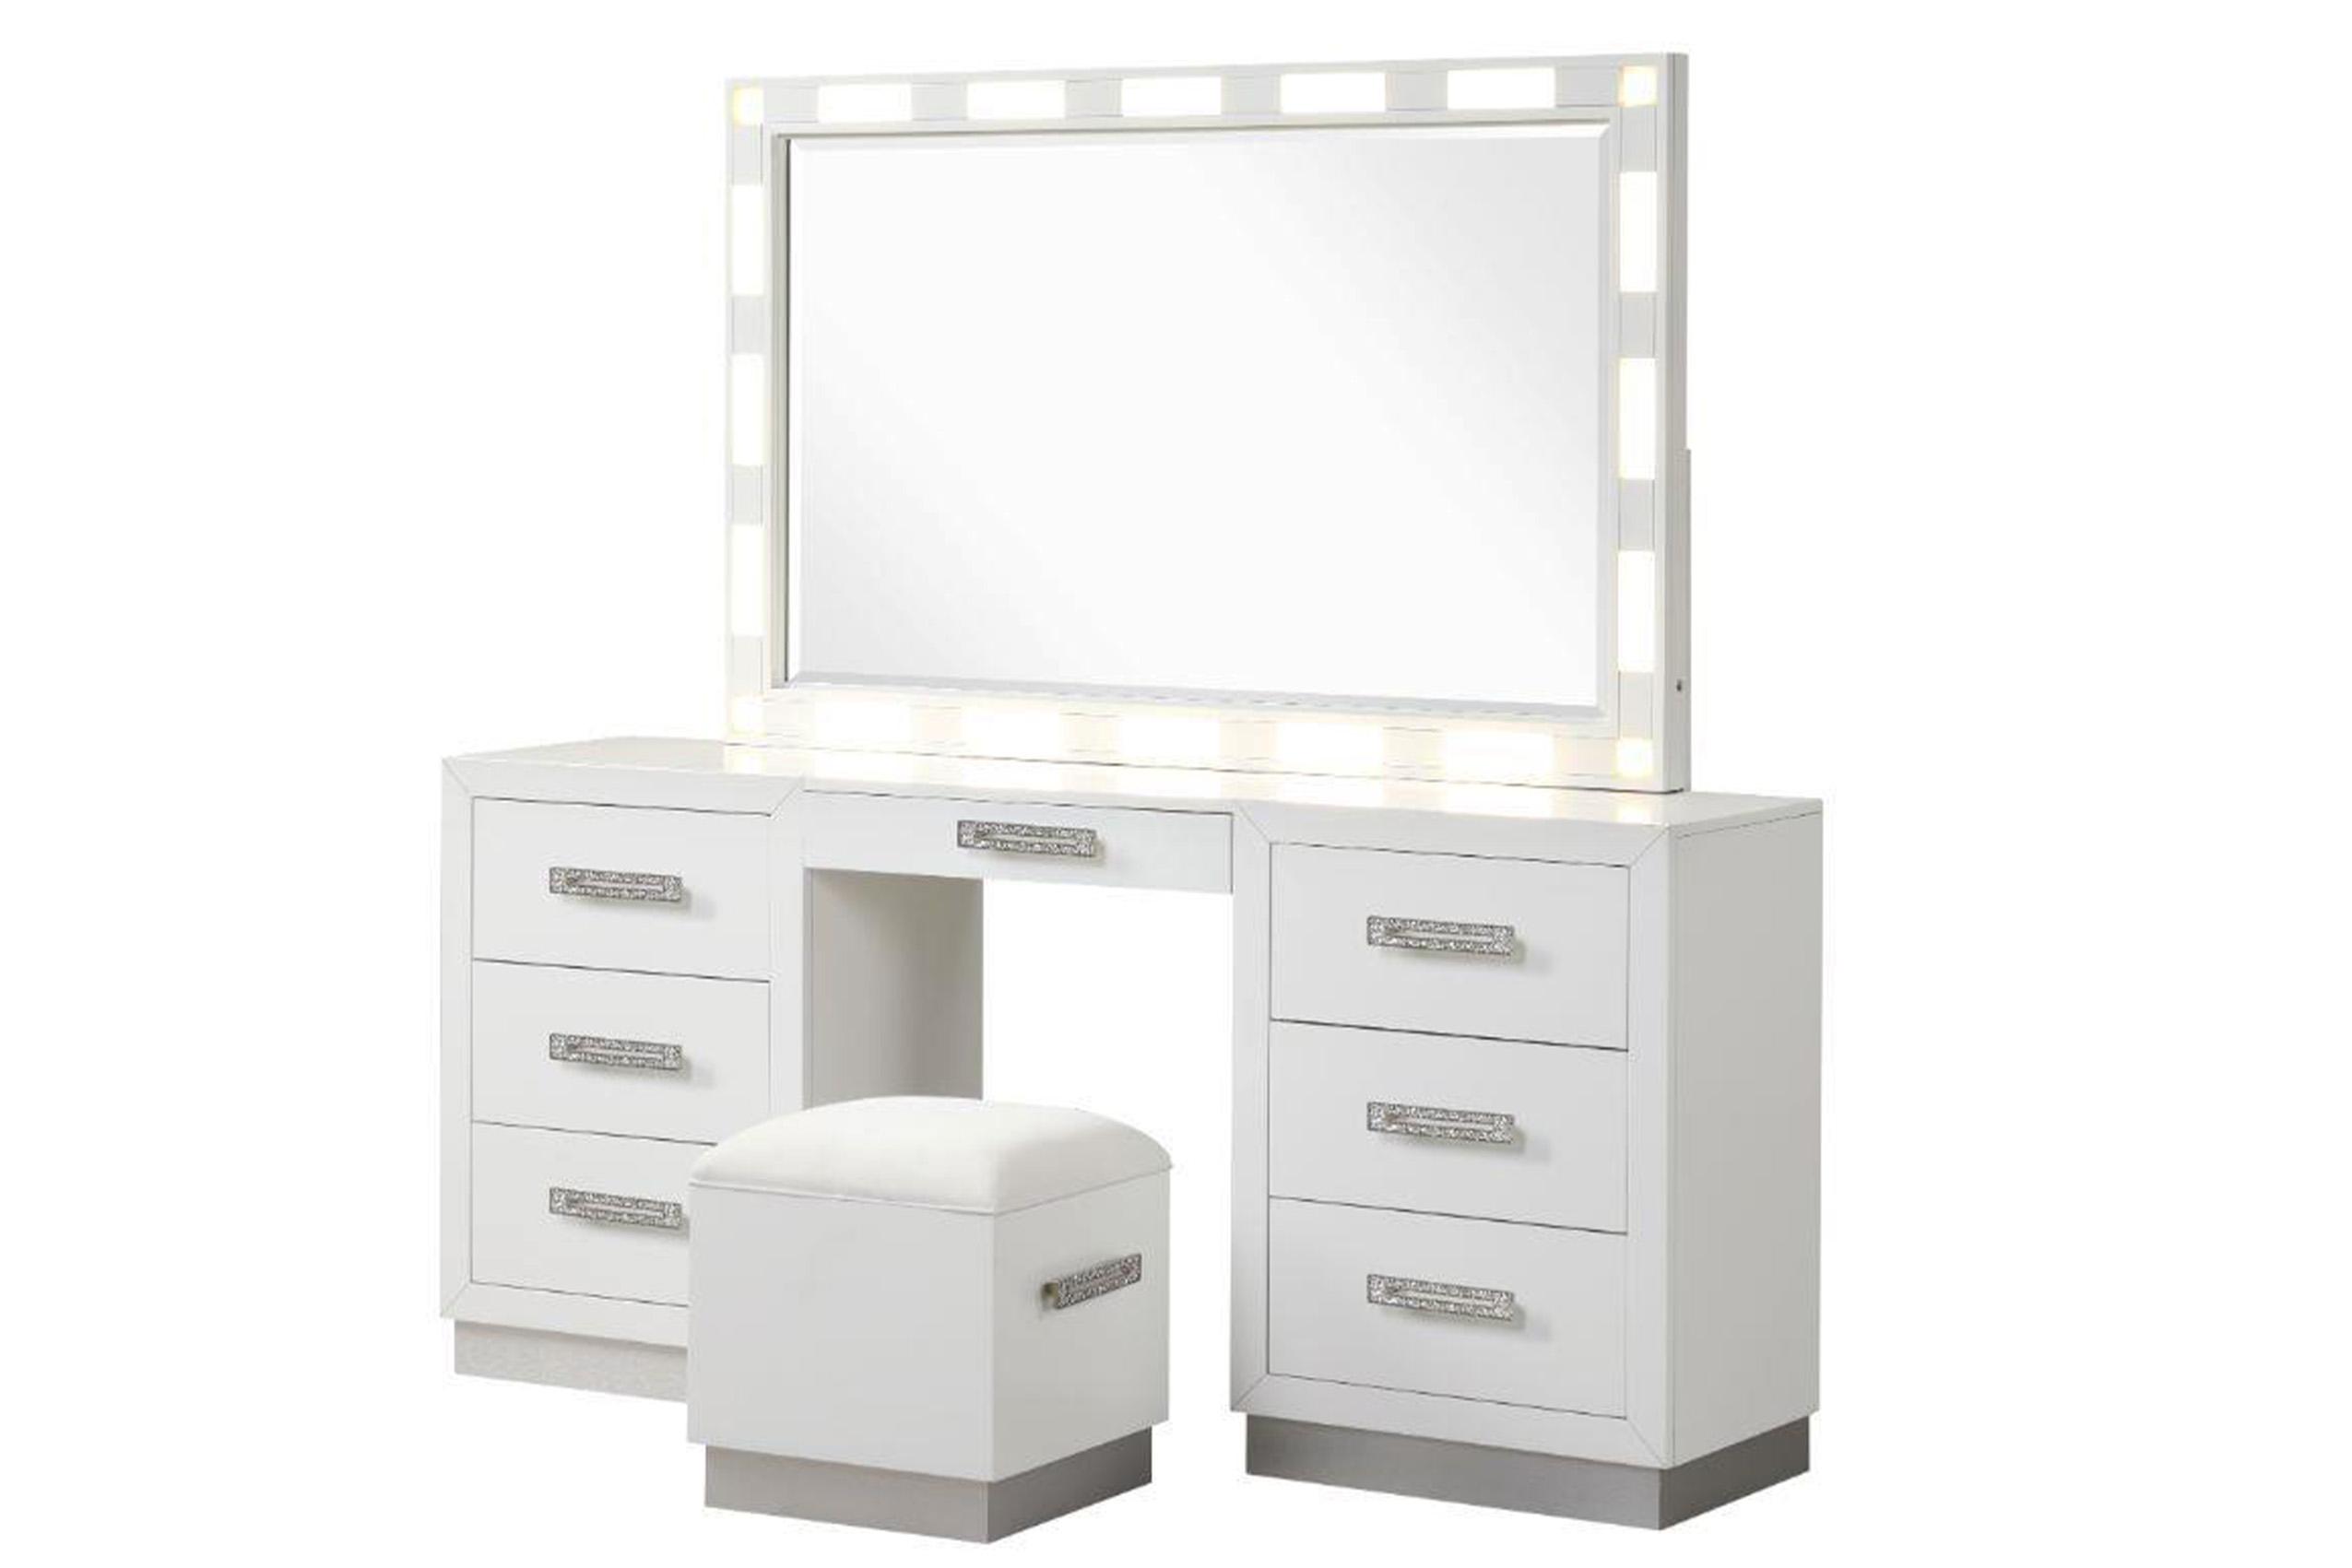 

    
Milky White Solid Wood Vanity Set COCO Galaxy Home Modern Contemporary
